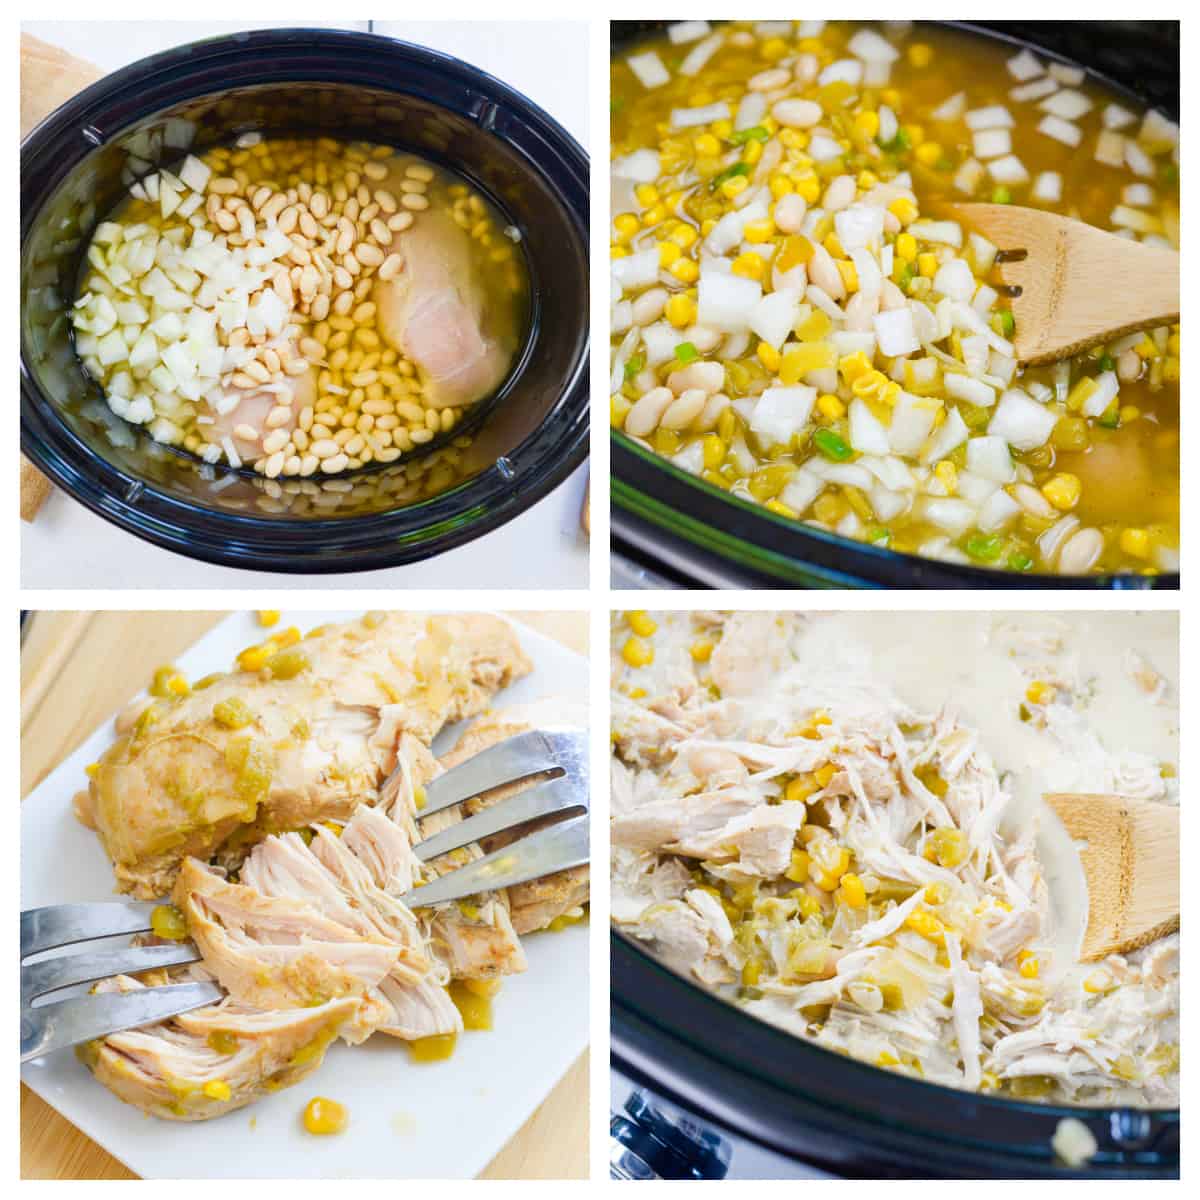 Collage showing the steps to making crock pot white chicken chili.